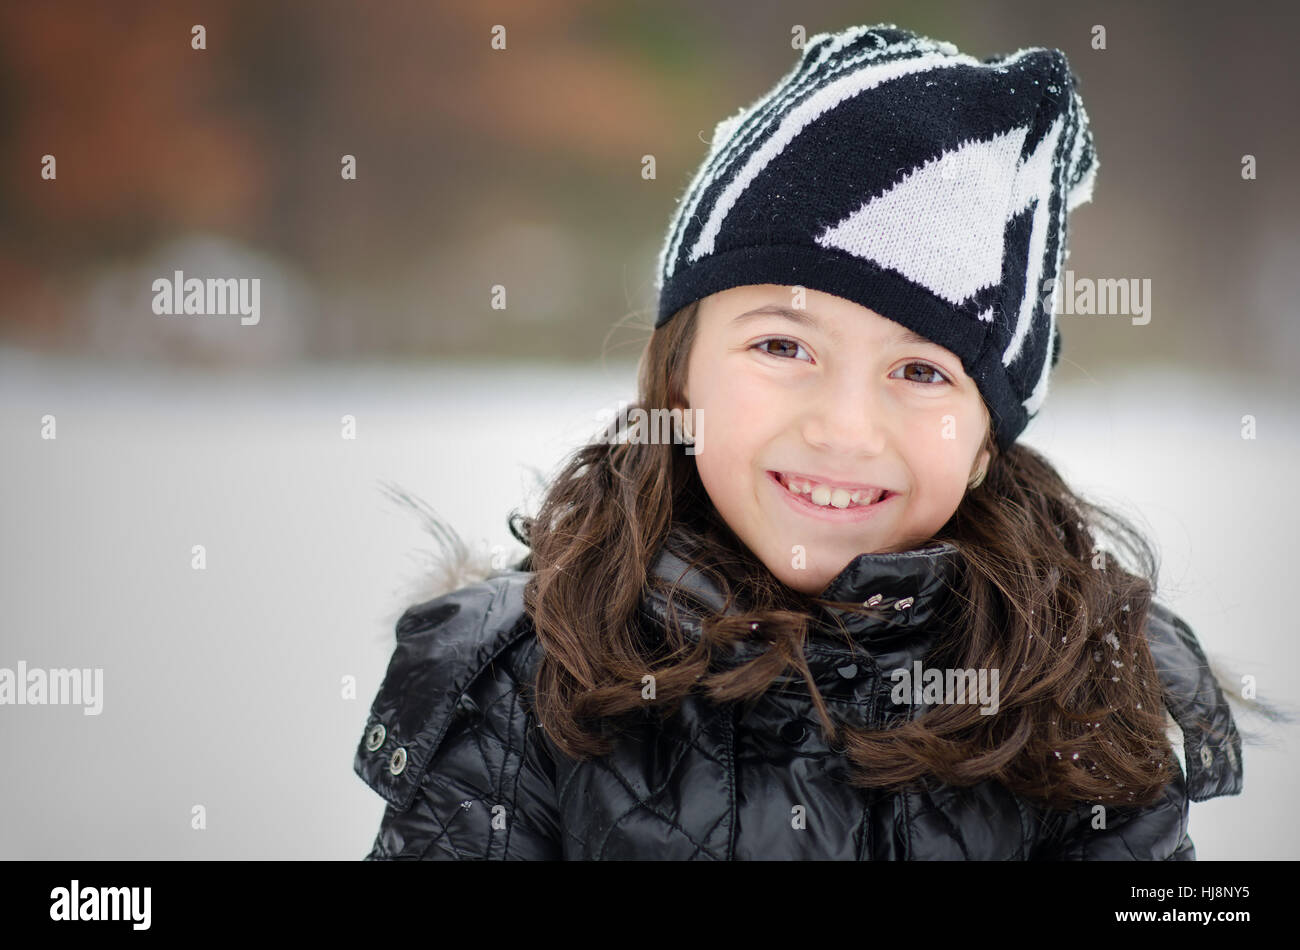 Portrait of a smiling girl in winter hat Banque D'Images